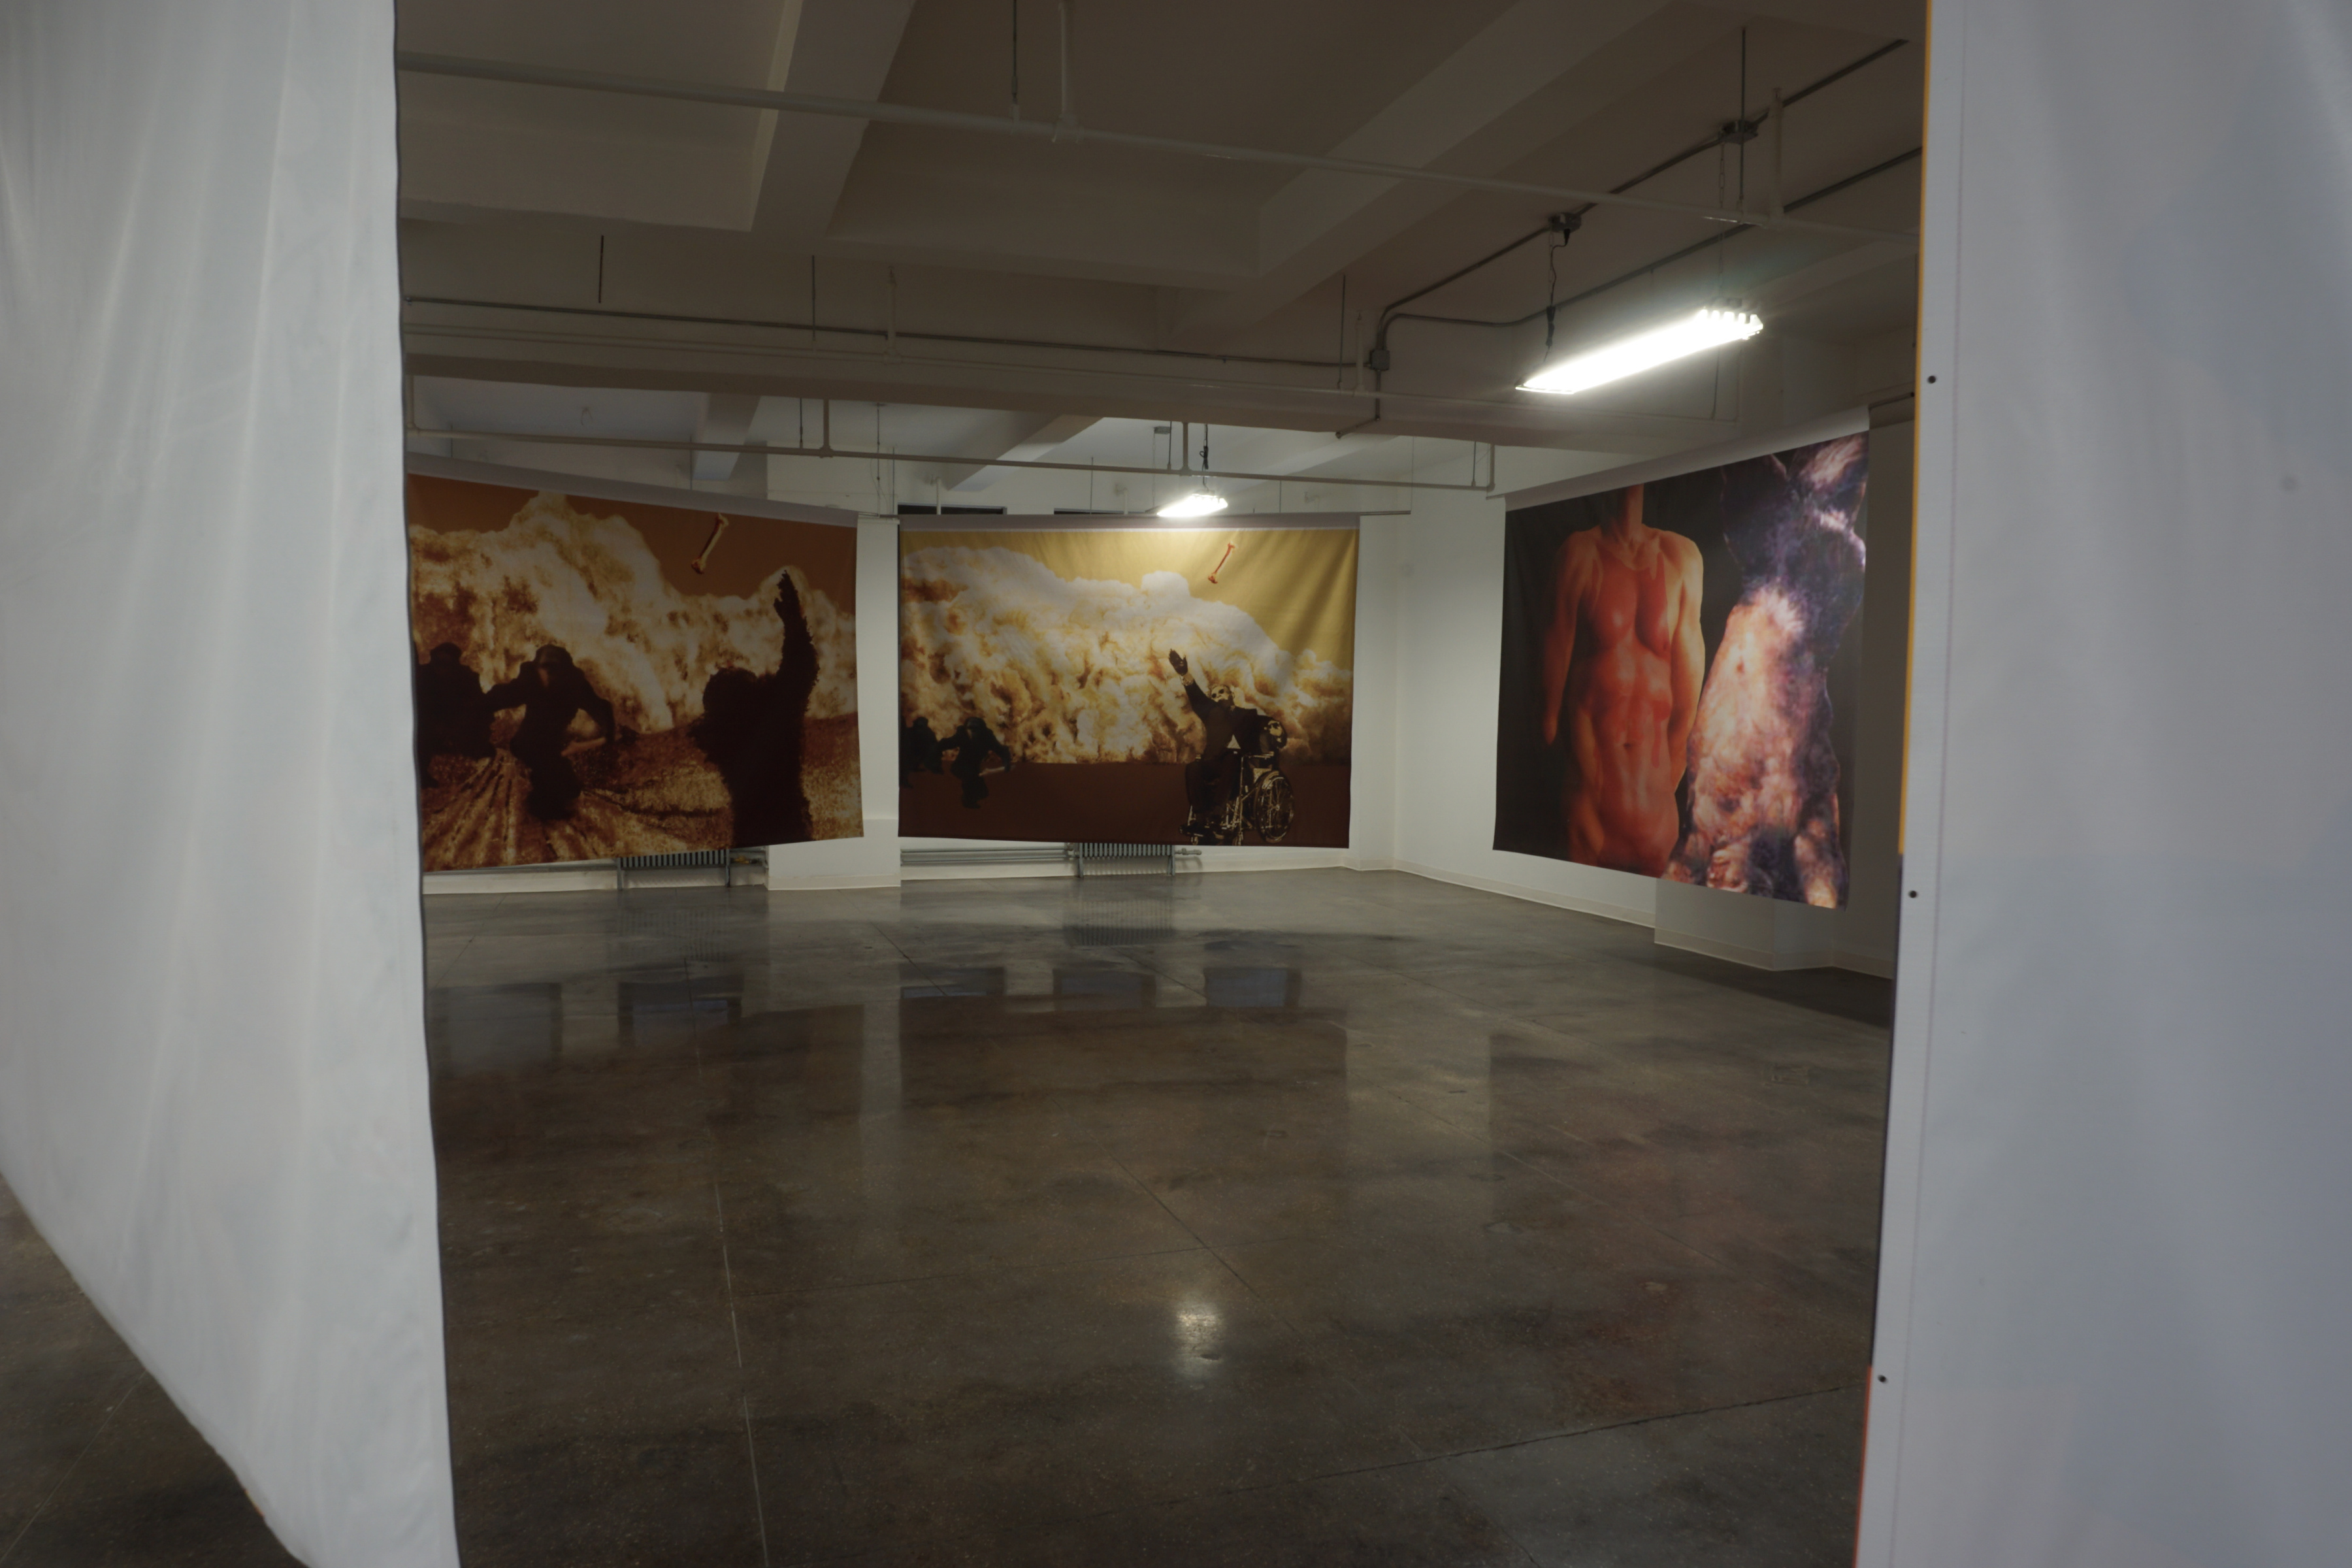 Installation view, Robert Morris: Banners and Curses, 24 WEST 40